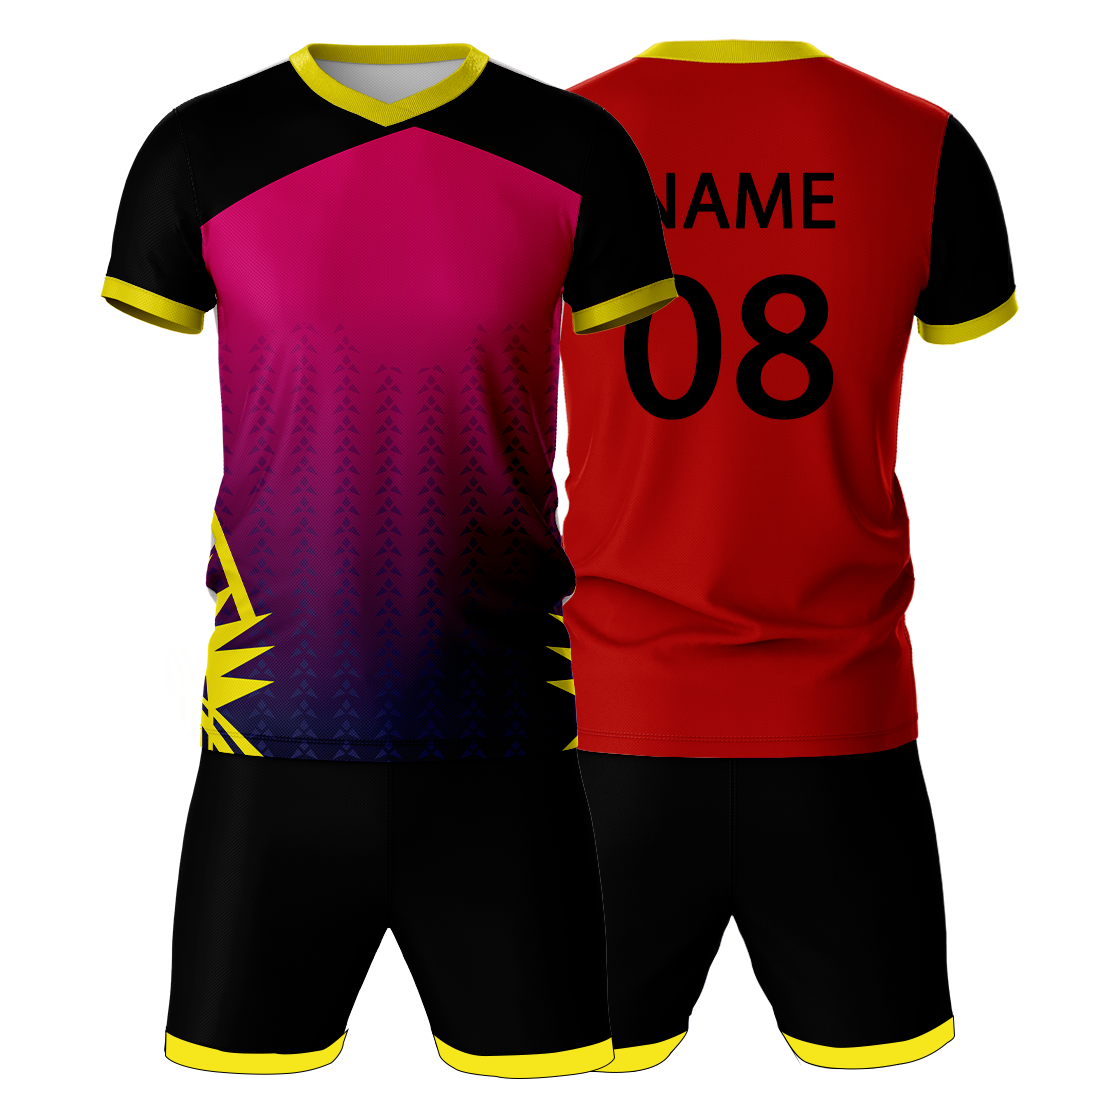 All Over Printed Jersey With Shorts Name & Number Printed.NP50000694